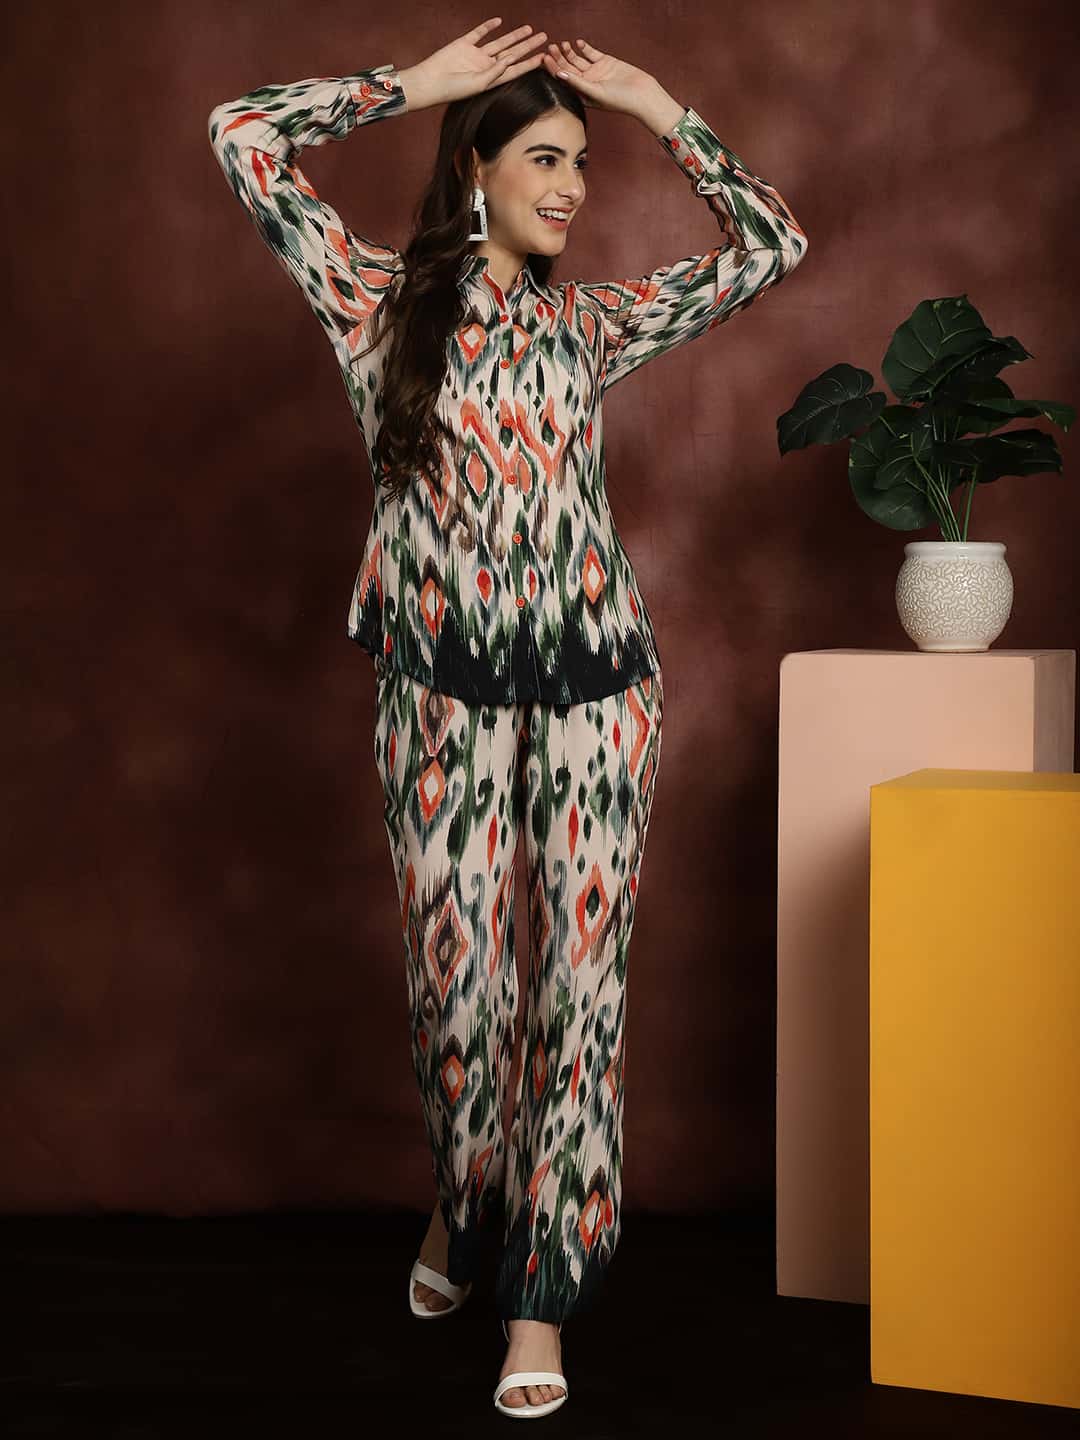 Multi Abstract Printed Chanderi Silk Shirt With Trousers Co-ord Set Claura Designs Pvt. Ltd. Cord set Abstract, Co-ord, Co-ord Set, Ethnic, Floral, multi color, Rayon